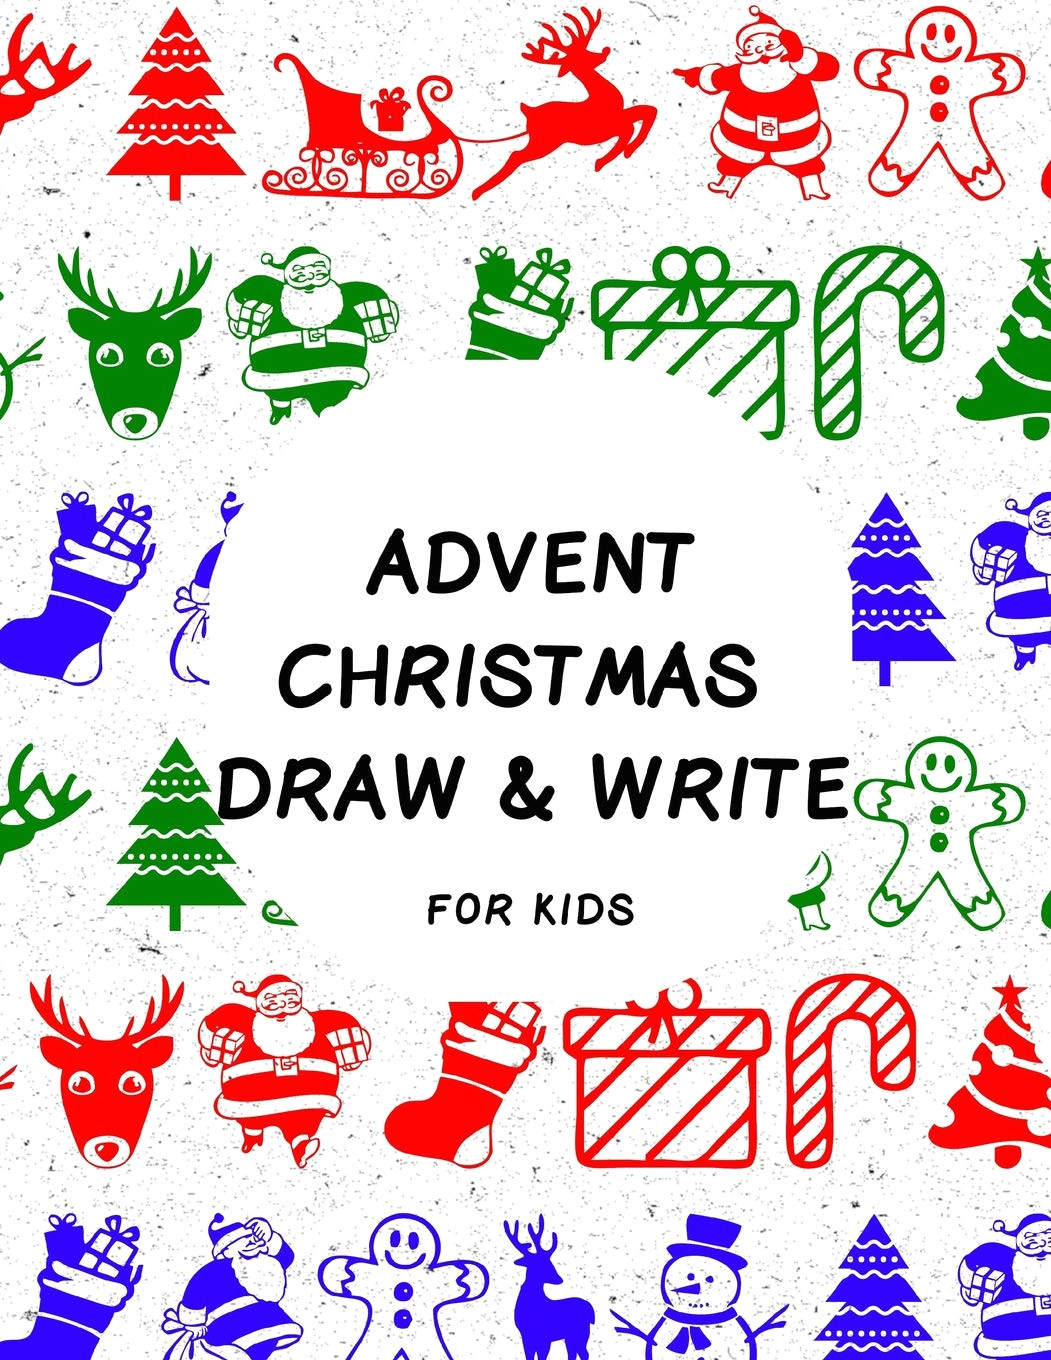 Cute Easy Christmas Drawings for Kids Advent Christmas Draw Write Fun Countdown Guided Drawing